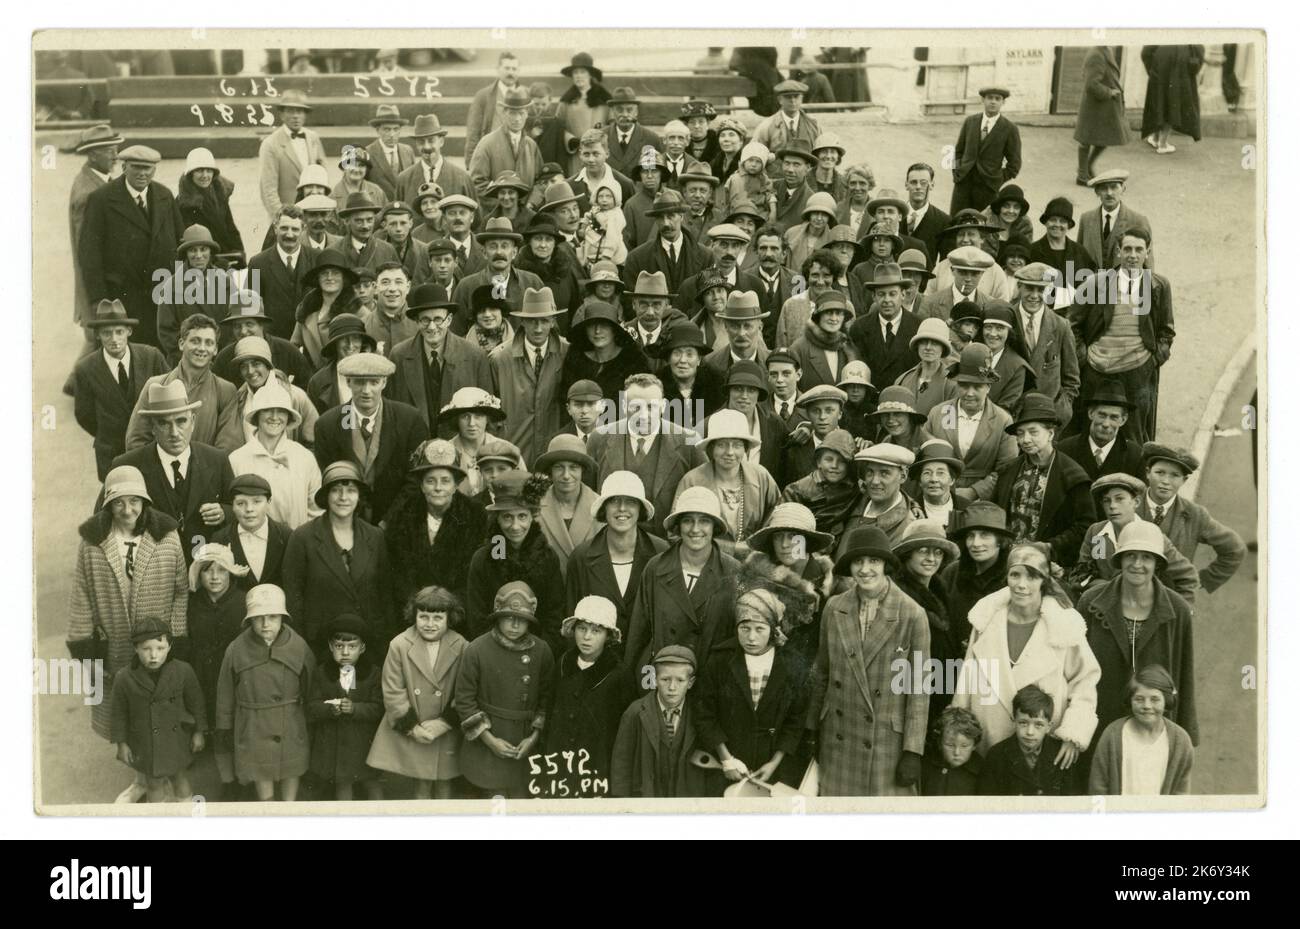 Original 1920's era postcard of large crowd at the seaside, photographed by the pier. published by B.B. Photo series dated 9 August 1925 6.16pm, printed on front. Some characters, lots of fashions, including  lady's cloche hats and men's homburg hats and flat caps. Bournemouth, England, UK. Stock Photo